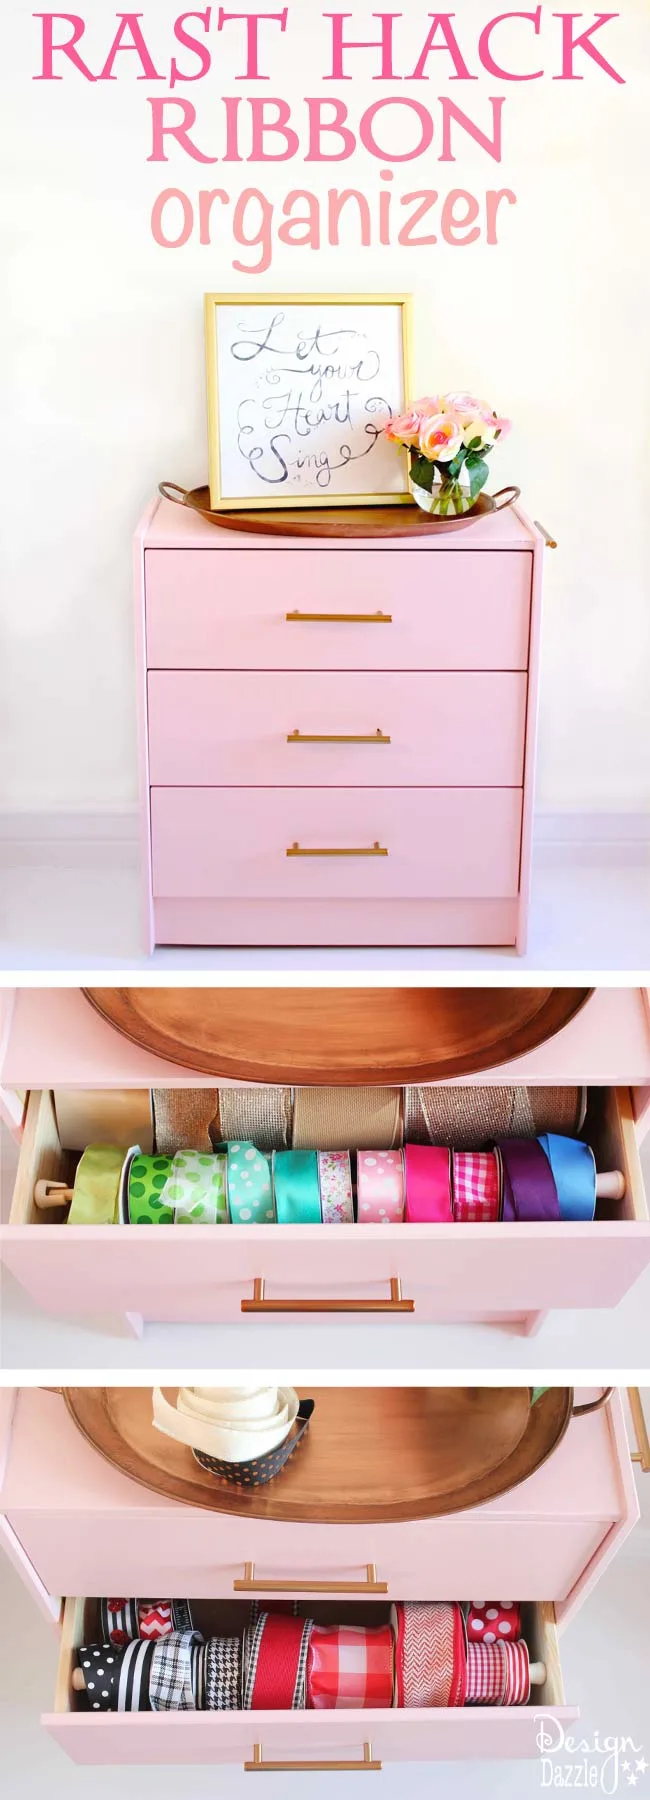 14 IKEA RAST hacks and makeovers that take a ridiculously cheap piece of furniture and turn it into something epic! You'll love these easy DIY home projects and furniture upgrades!